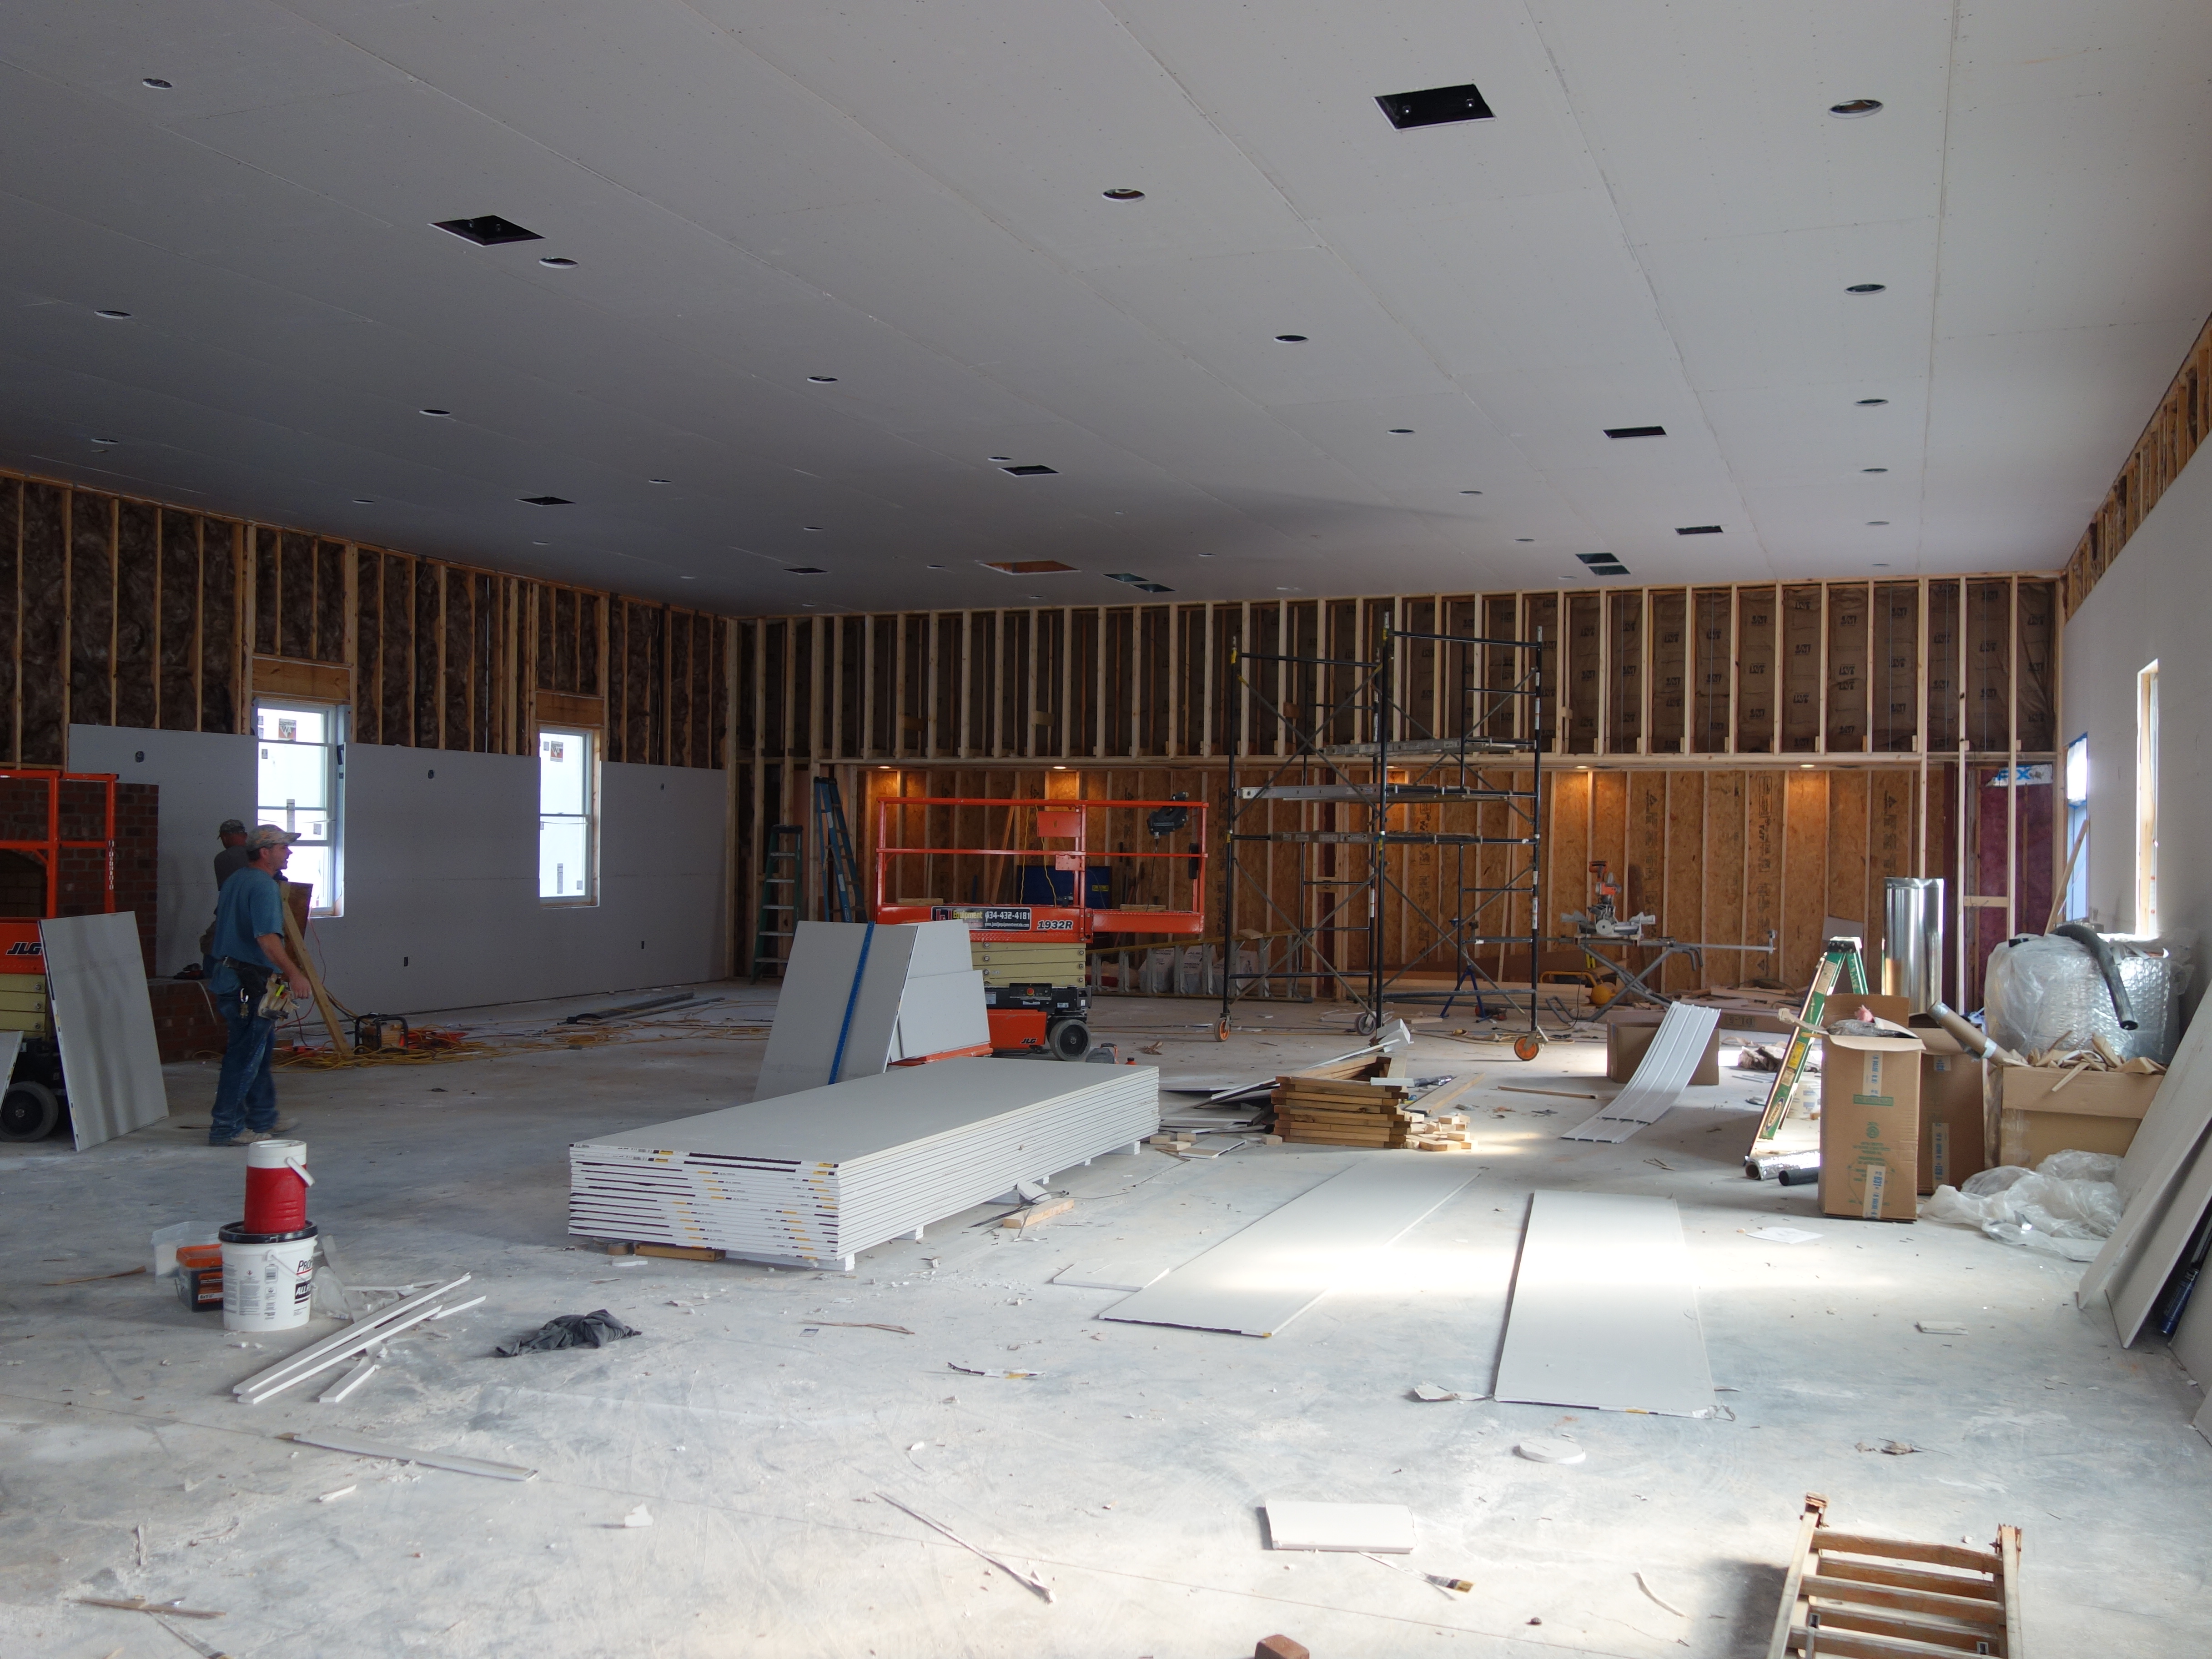 Unfinished construction on the interior of the fellowship hall